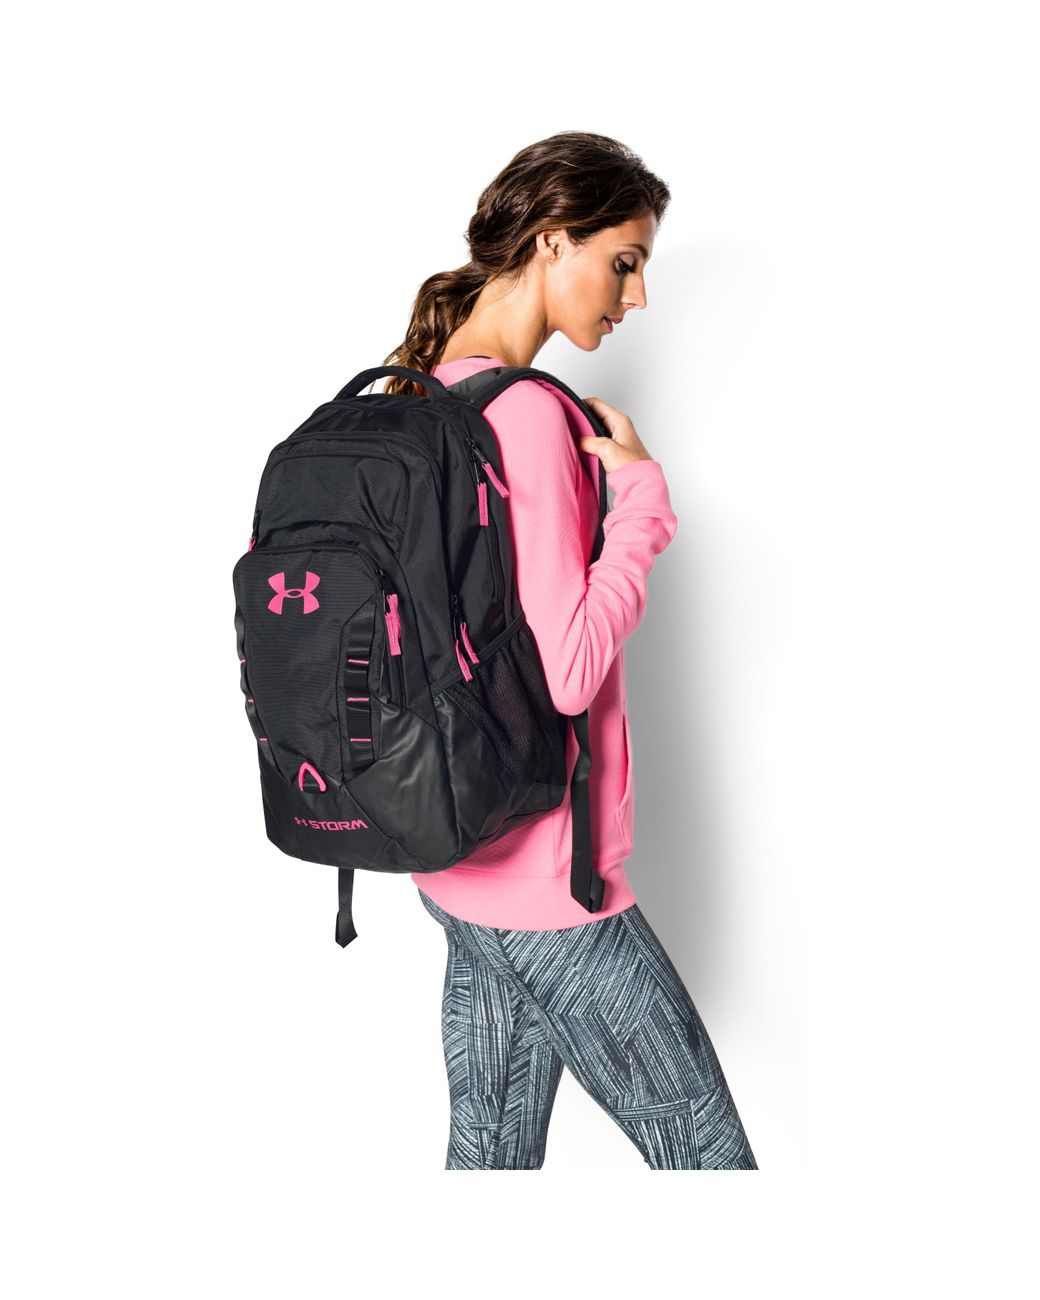 Under Armour Women's Ua Storm Recruit Backpack in Gray | Lyst